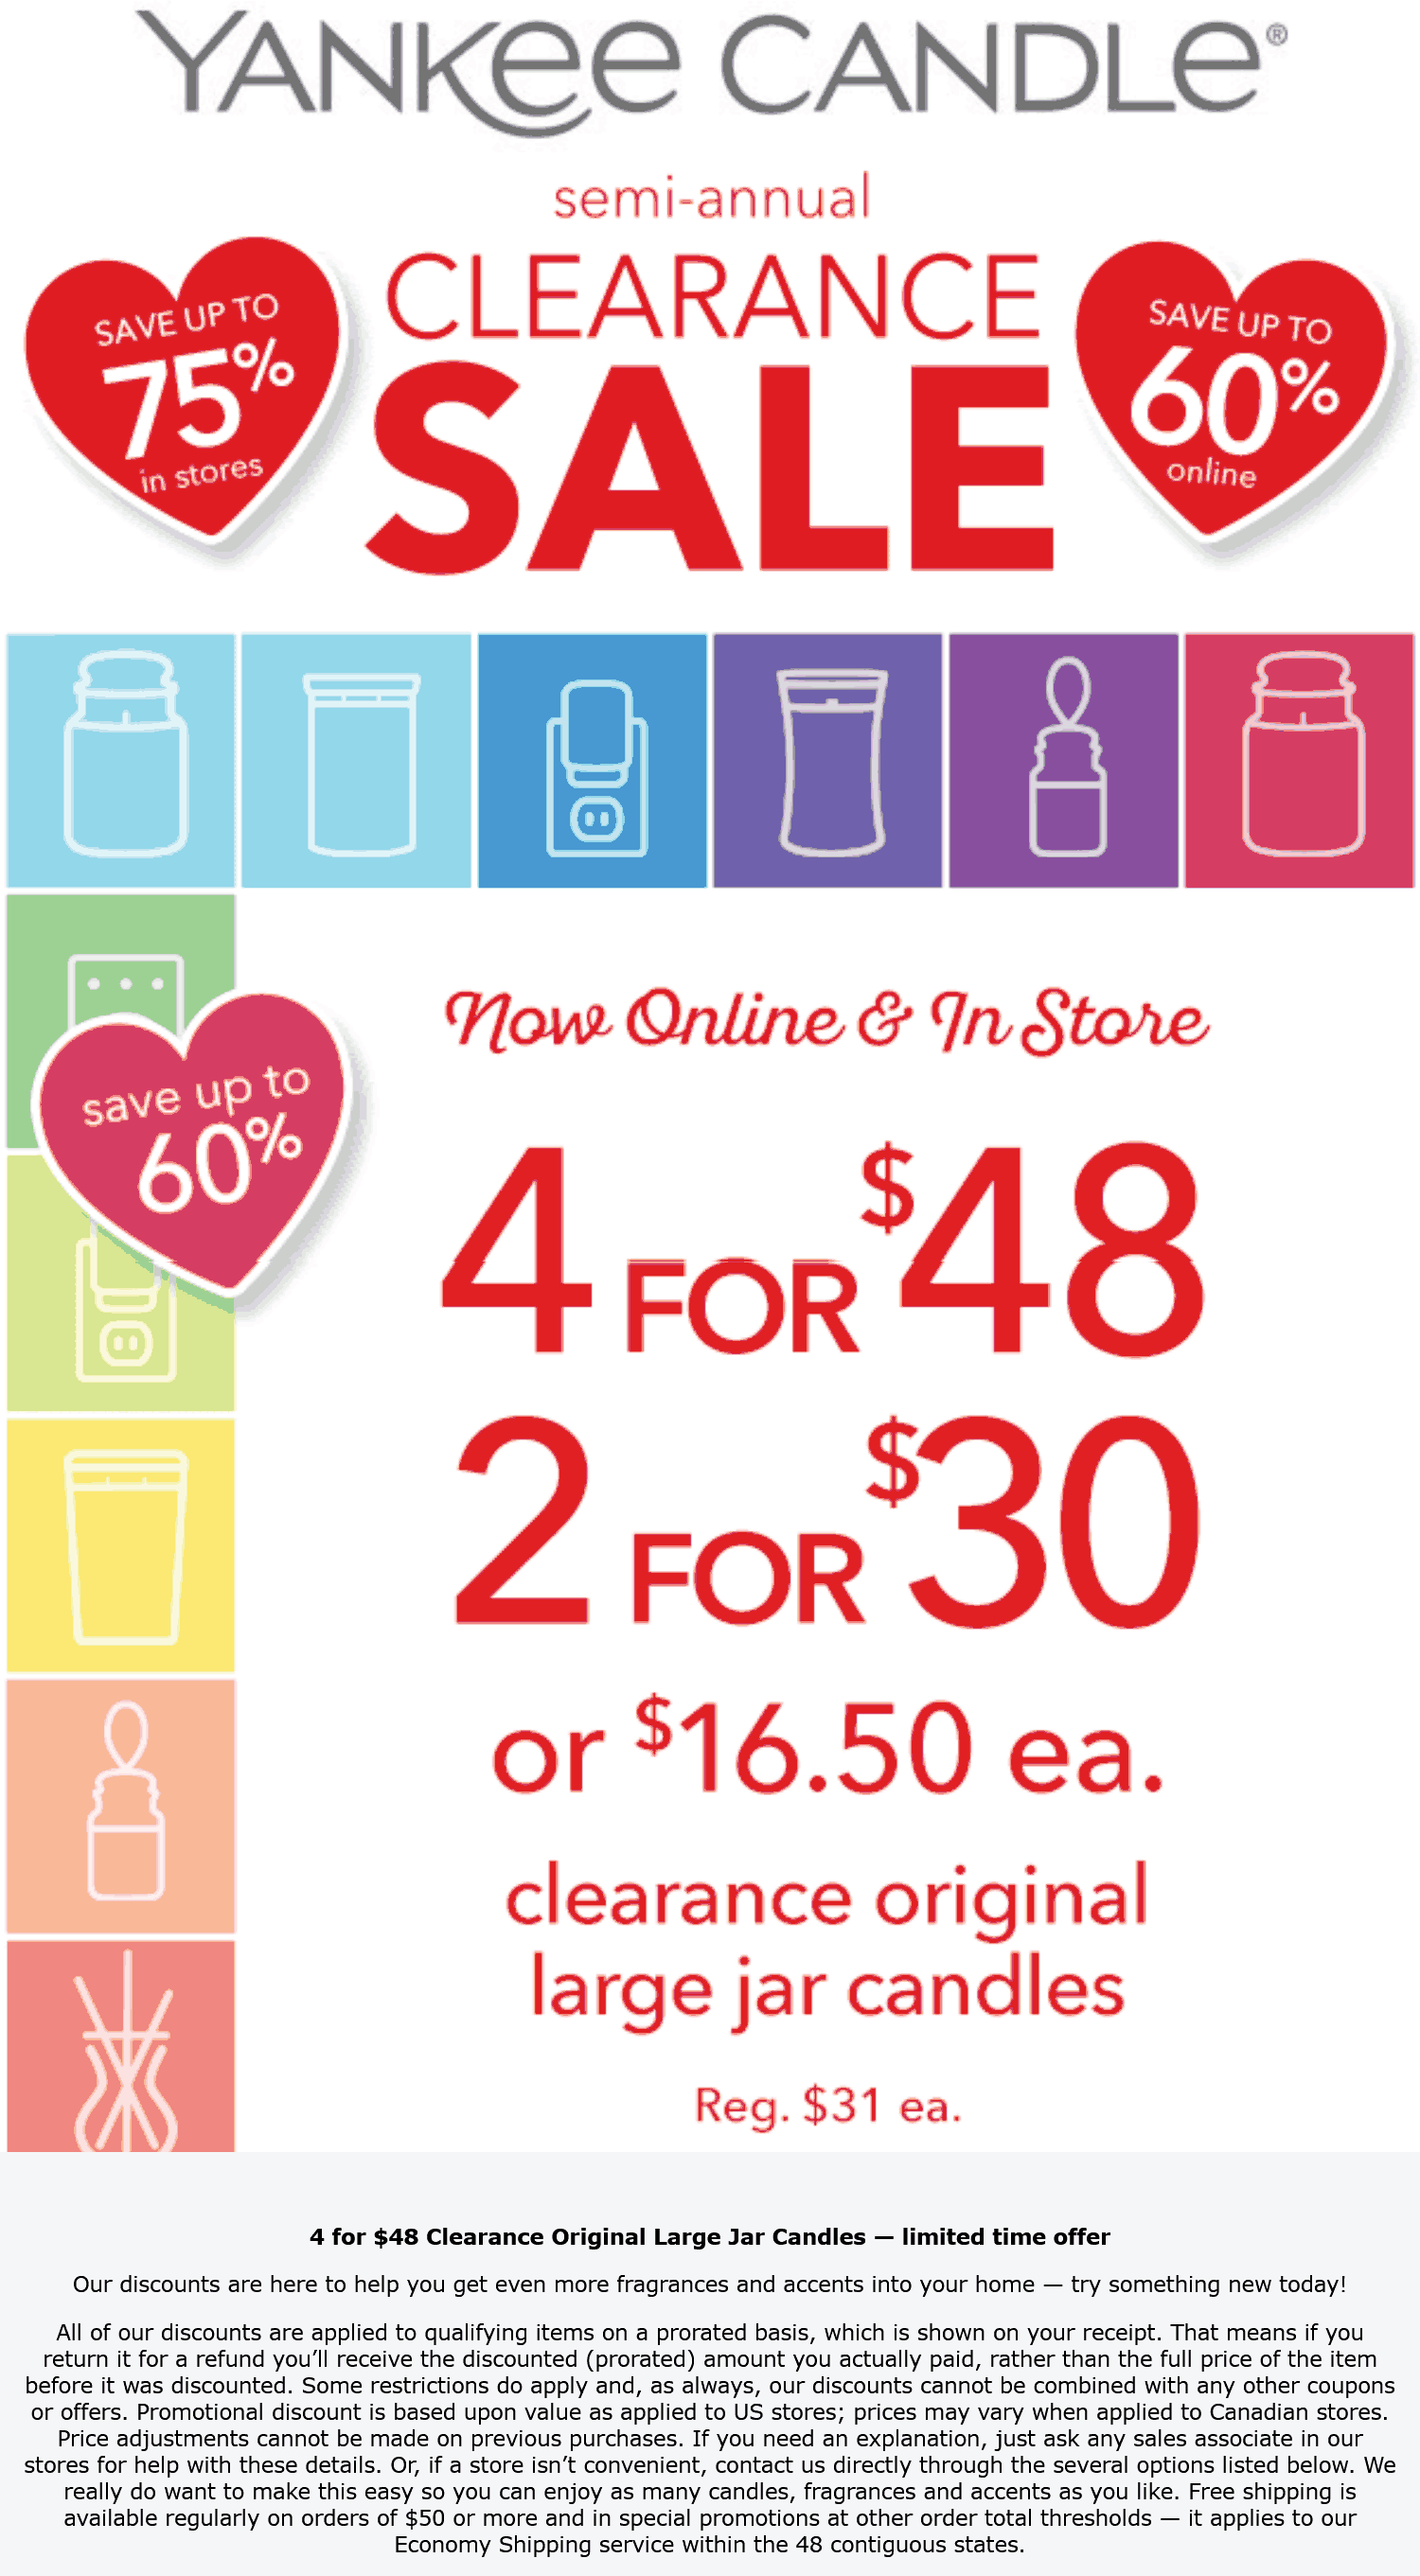 Yankee Candle stores Coupon  Clearance large jar candles are 4 for $48 at Yankee Candle, ditto online #yankeecandle 